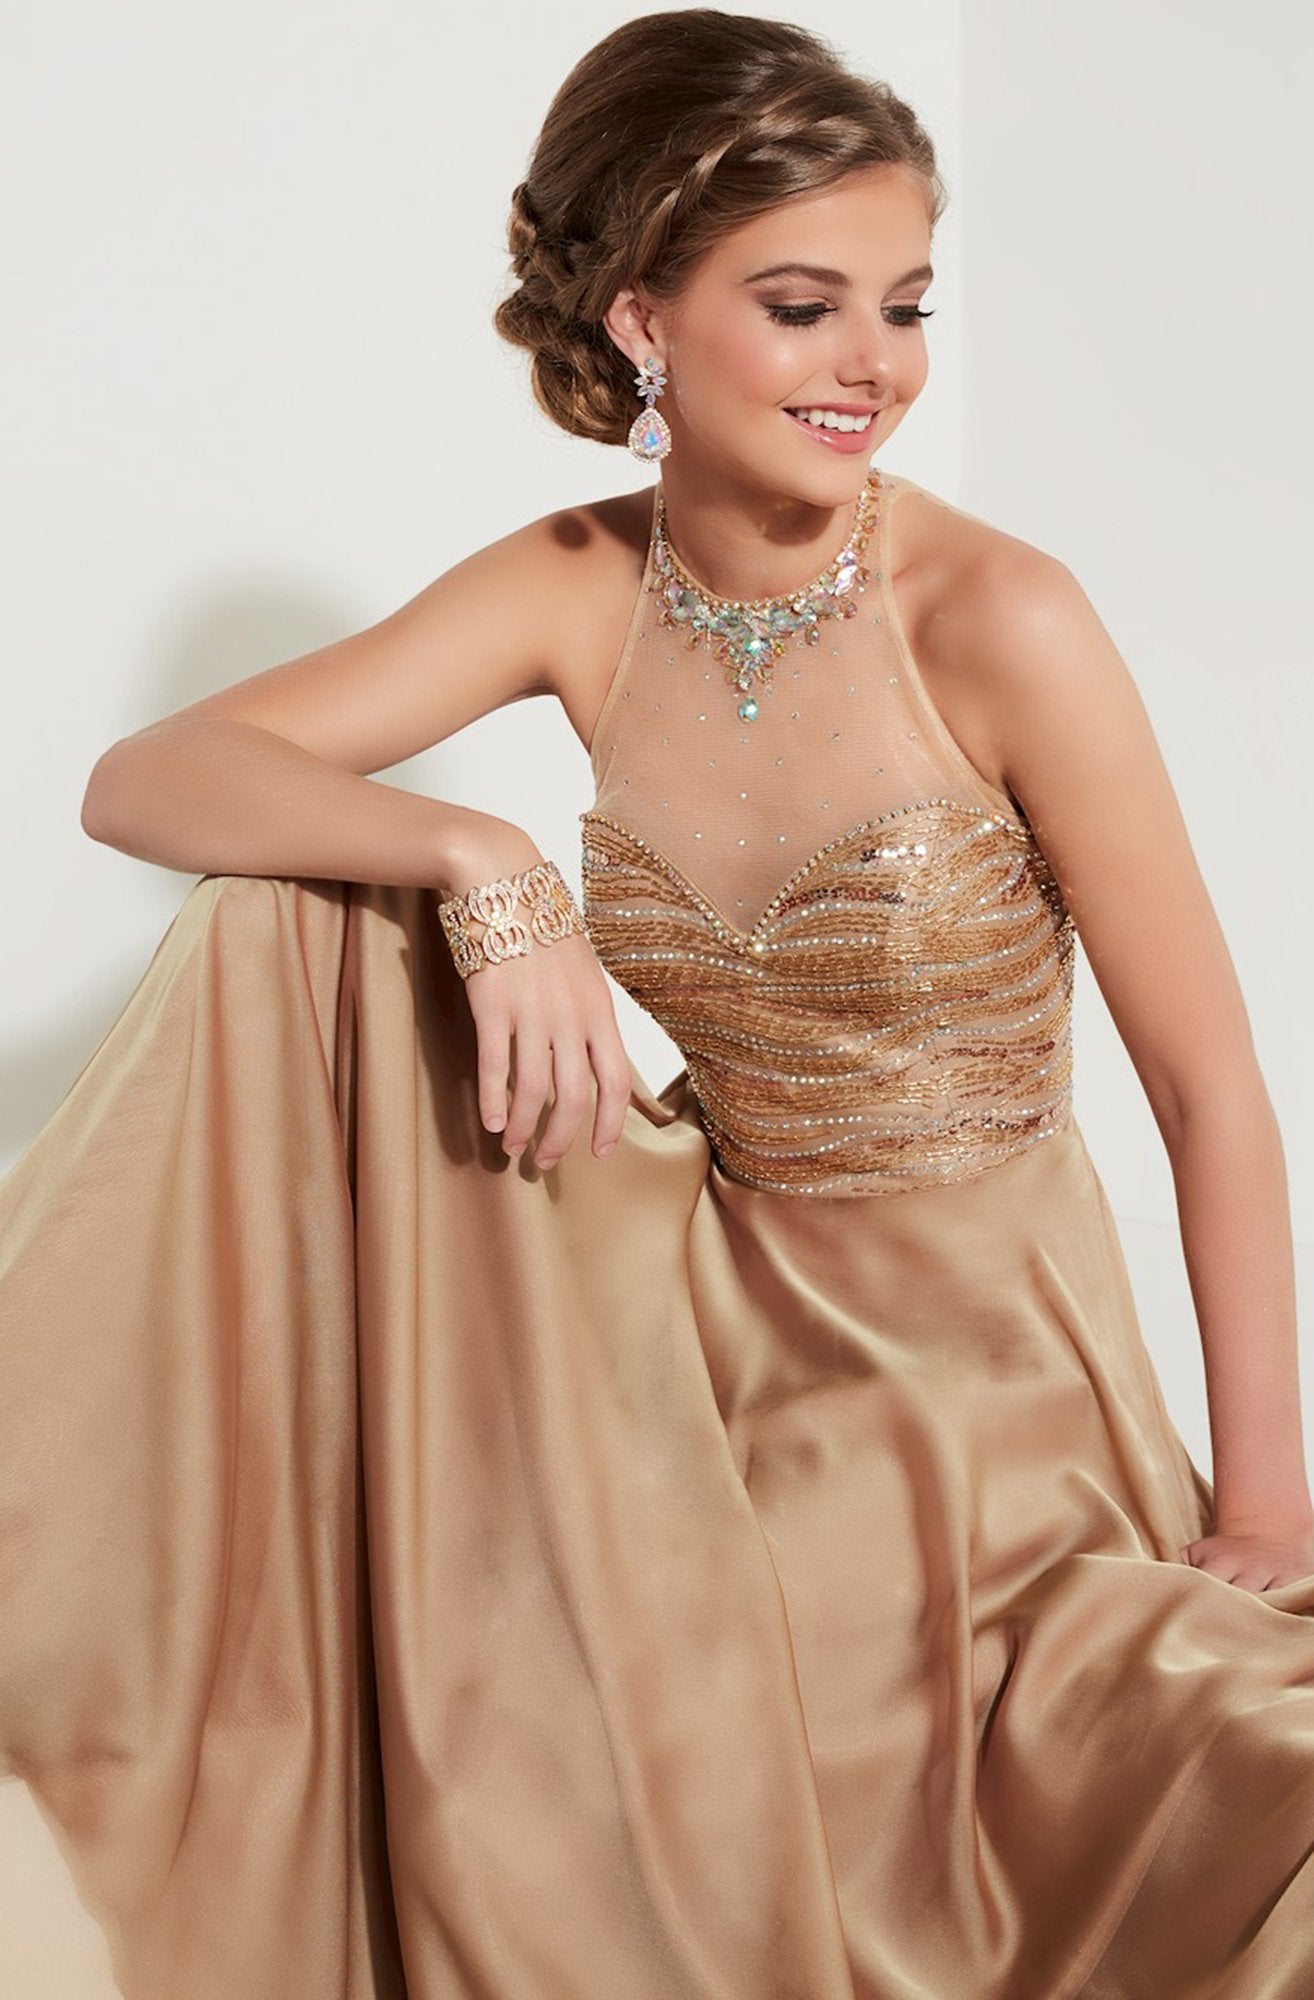 Studio 17 - Bejeweled High Halter Neck Two Tone Chiffon A-line Dress 12597 In Gold